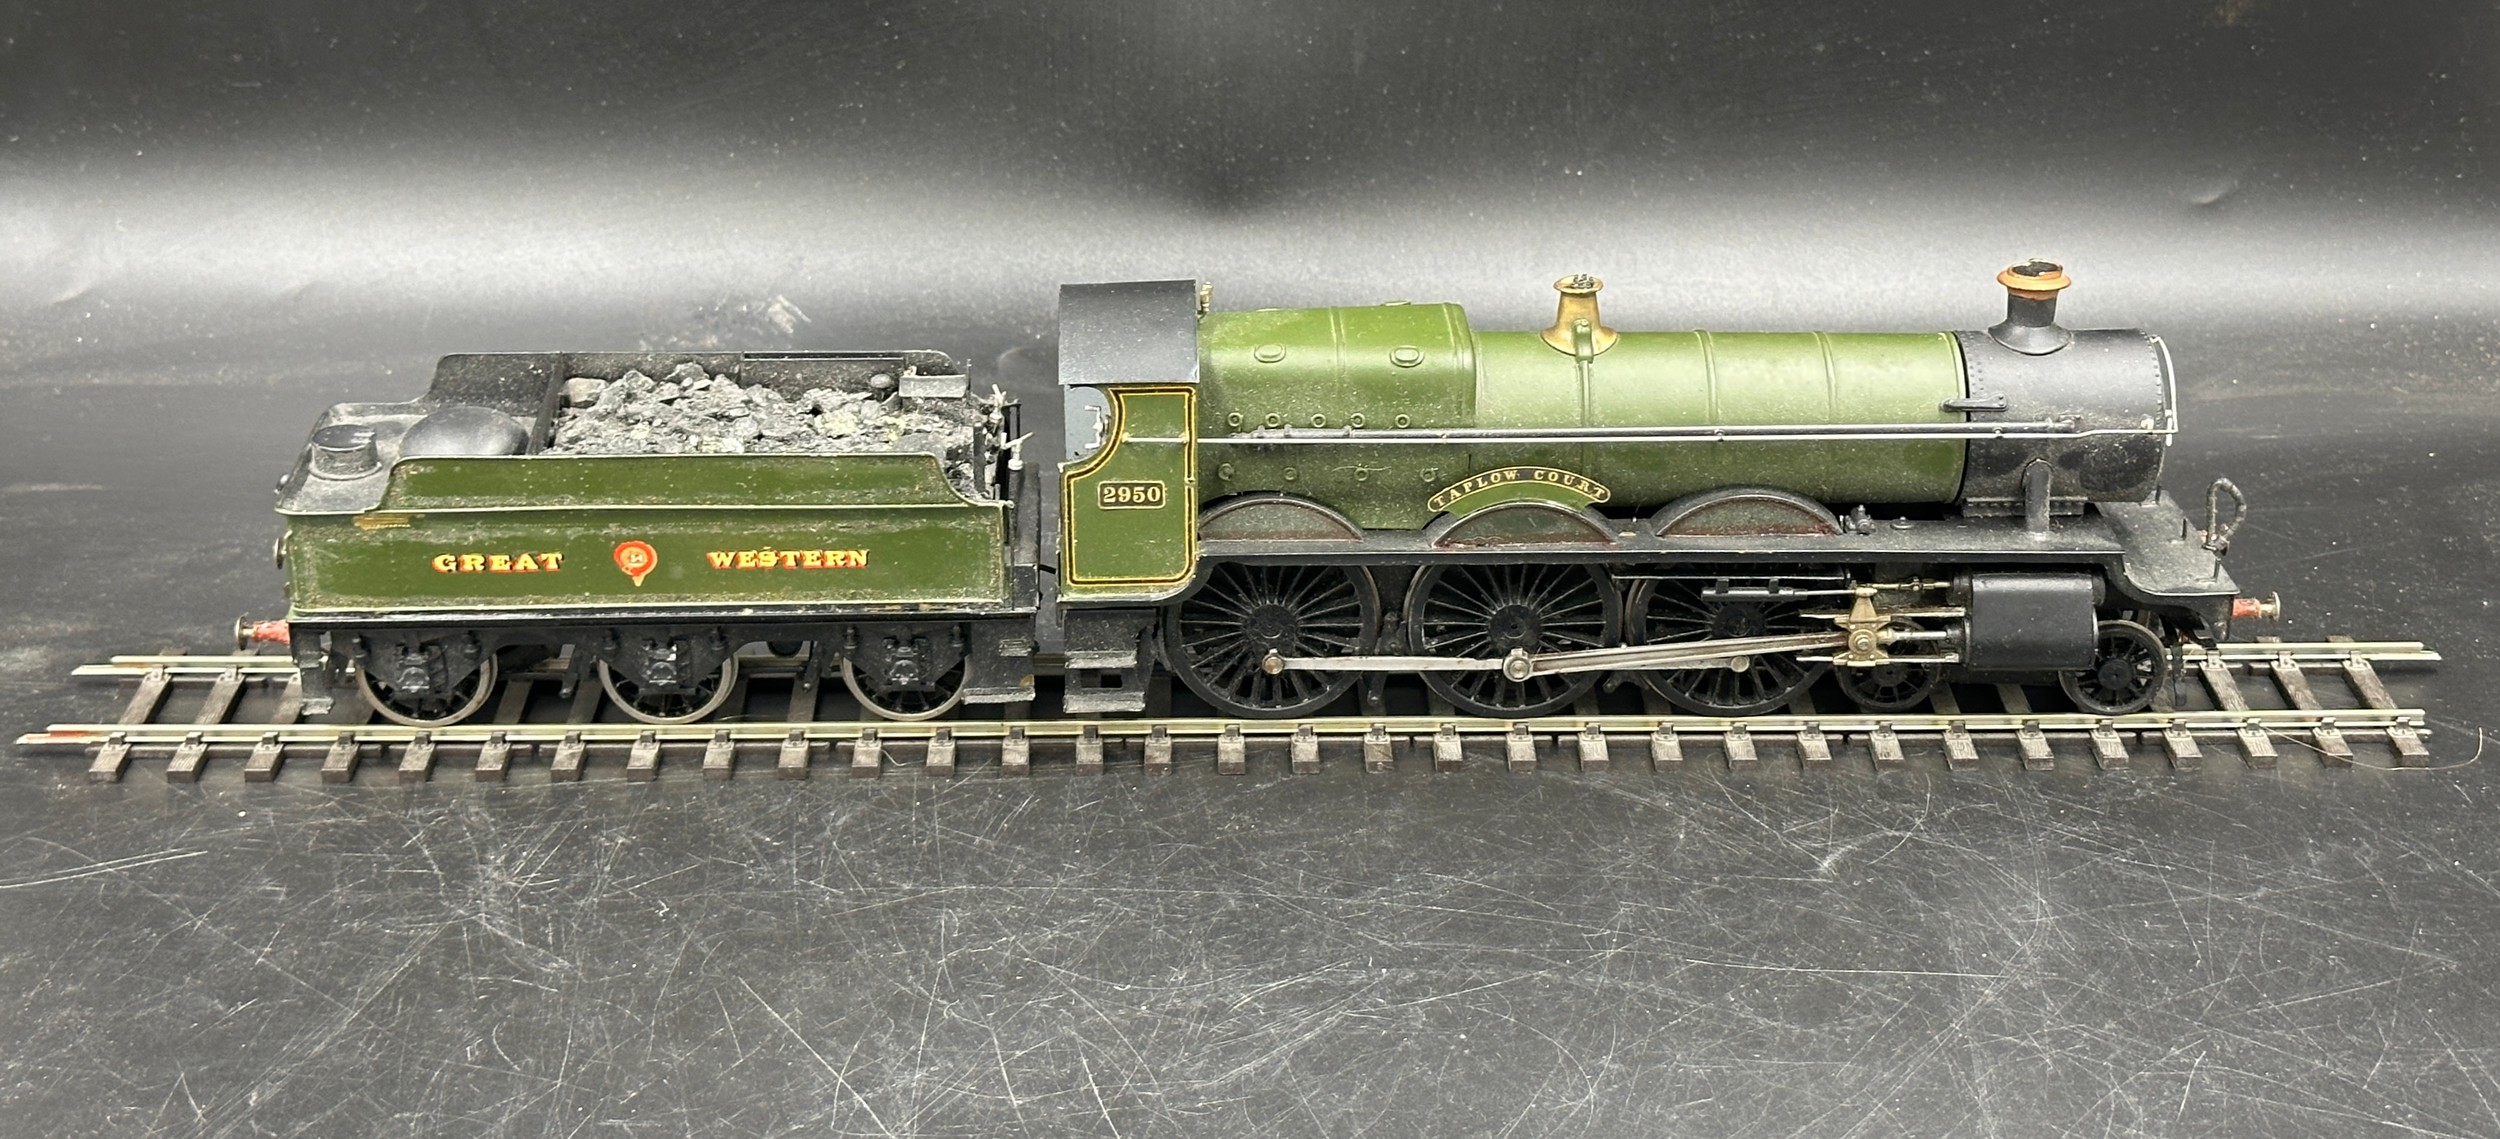 Taplow Court 2950 Great Western 0 gauge in 'Great Western' green with brass name and number plates